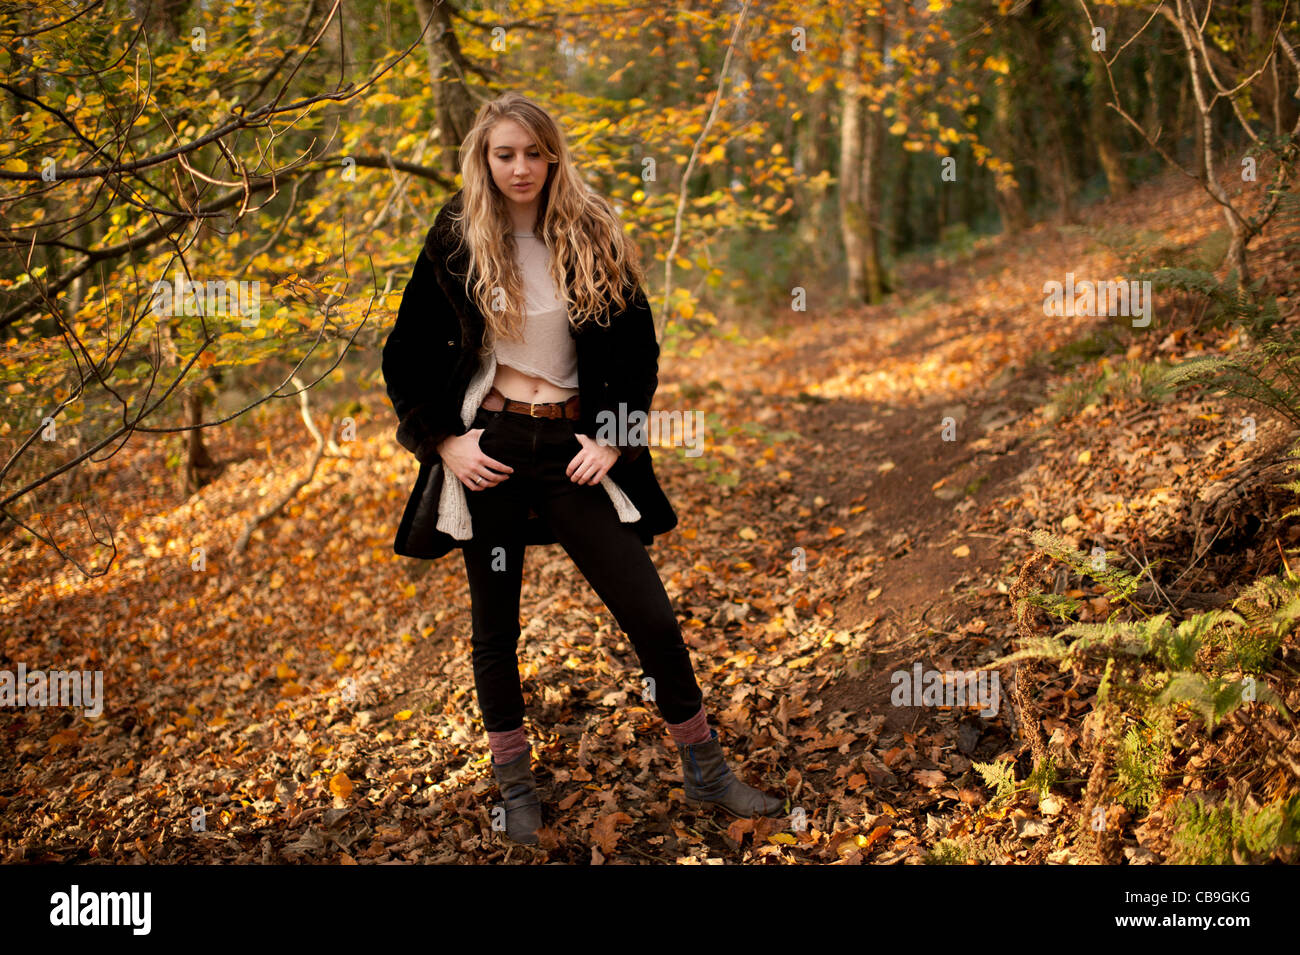 a slim blonde woman girl standing alone in woodland autumn afternoon daytime UK Stock Photo